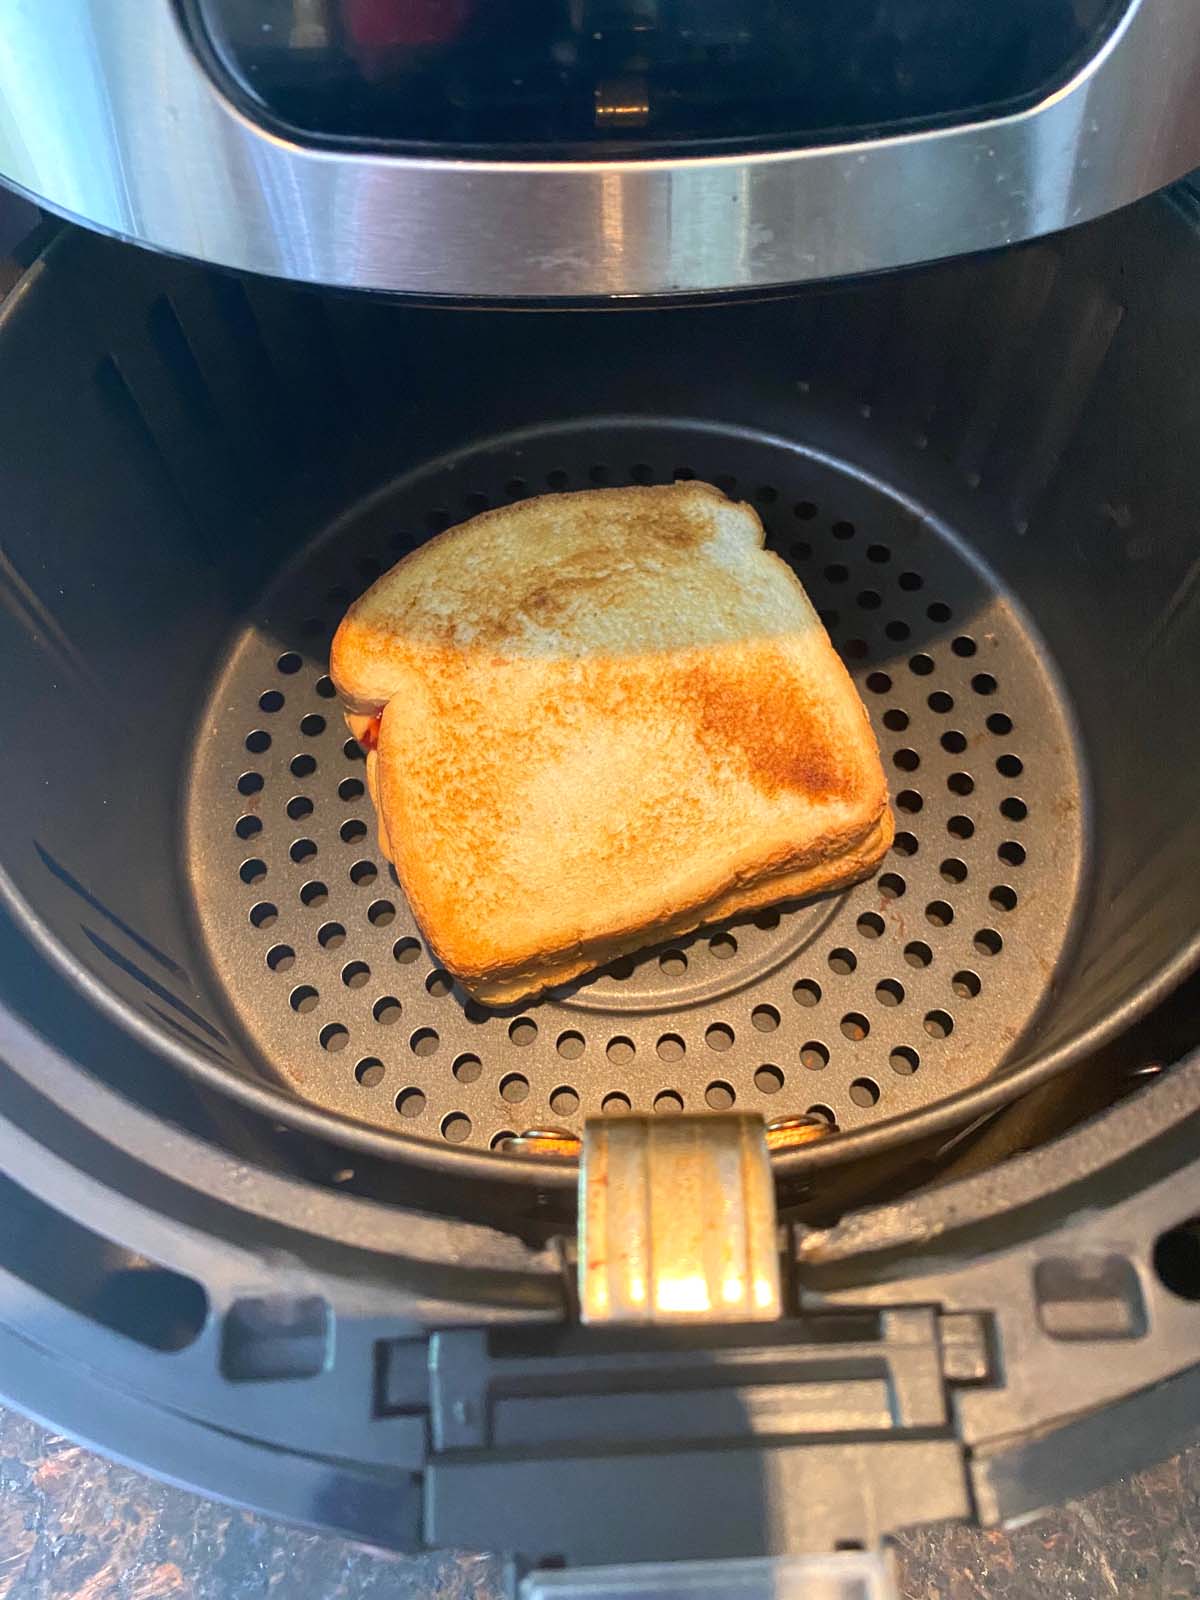 Toasted peanut butter and jelly in an air fryer.